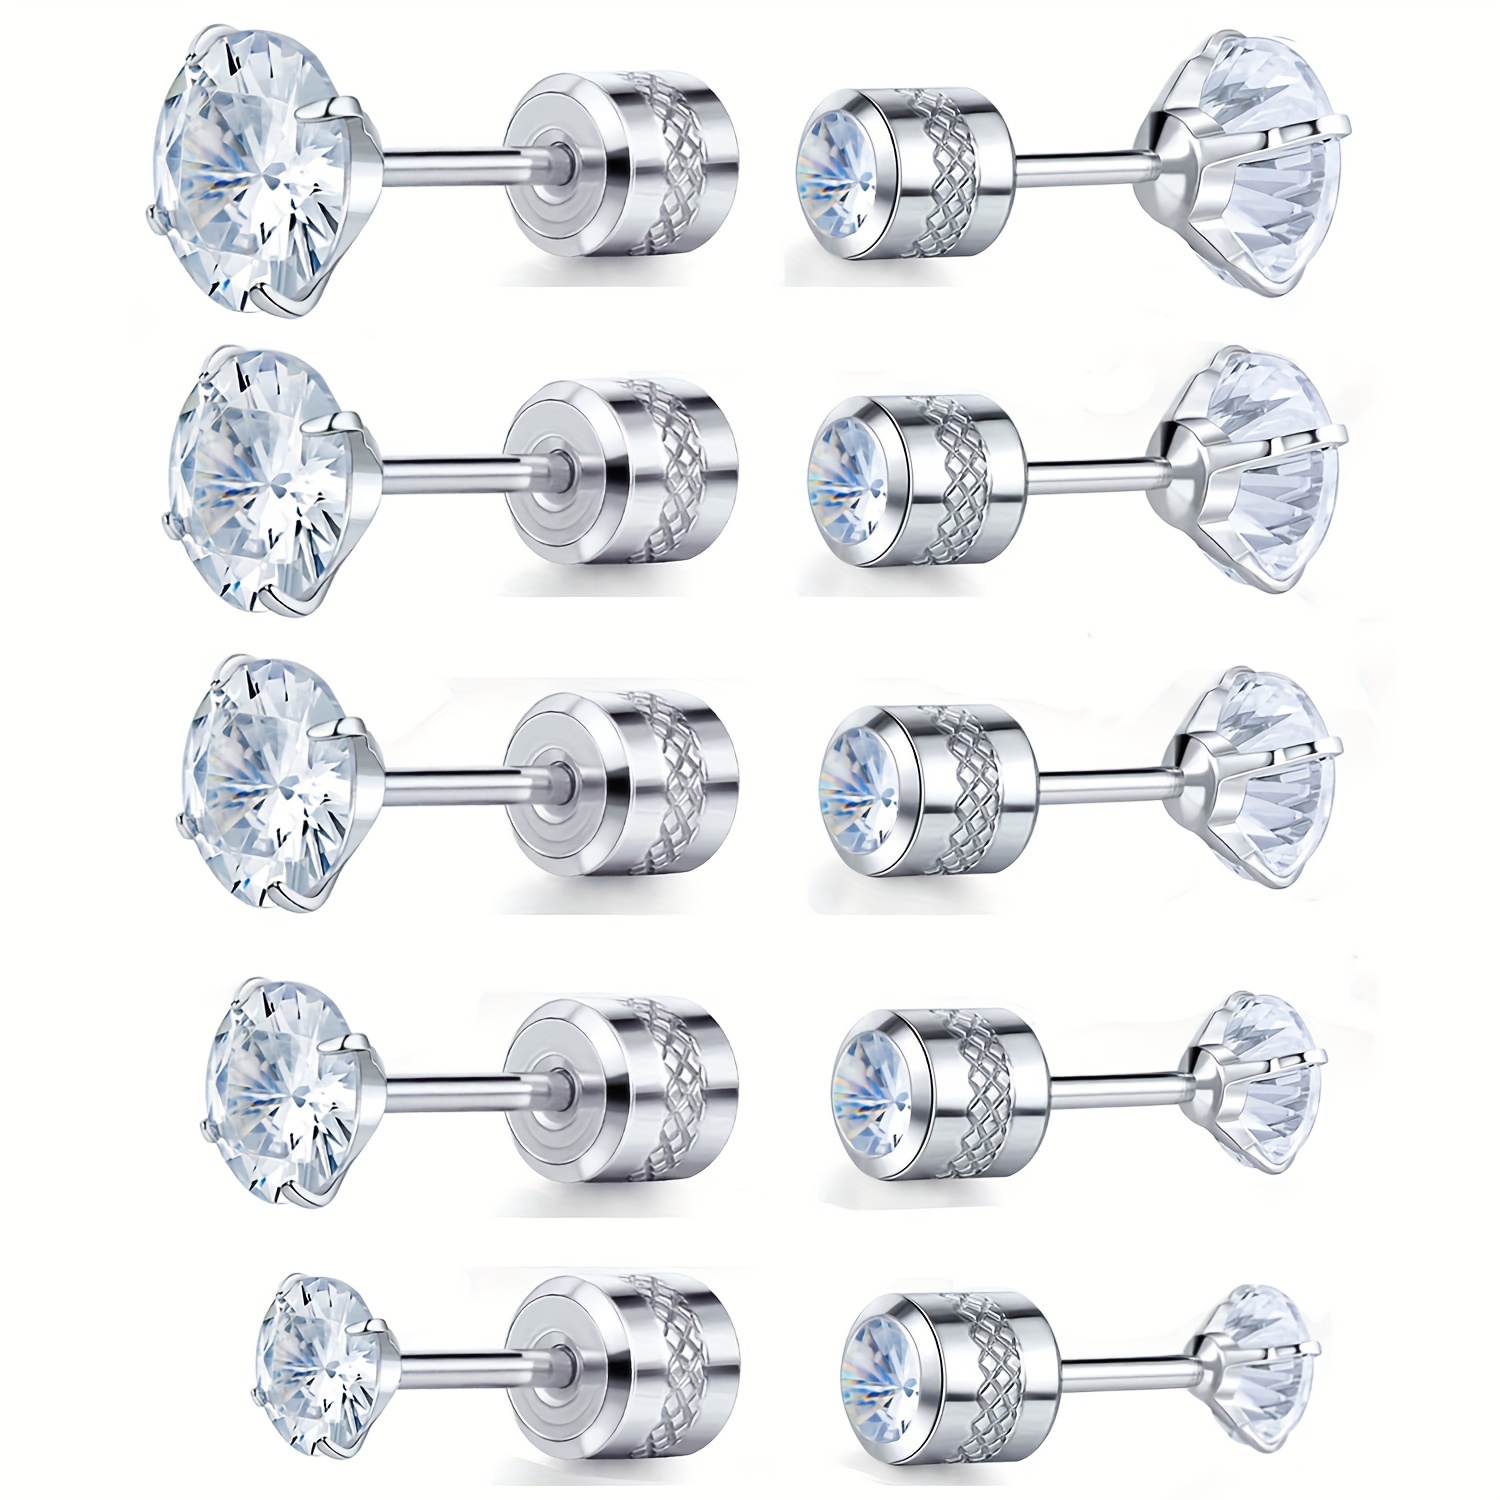 

Pack Of Titanium Round/square Cz Screw Back Earrings Hypoallergenic For Sensitive Ears 5 Pairs